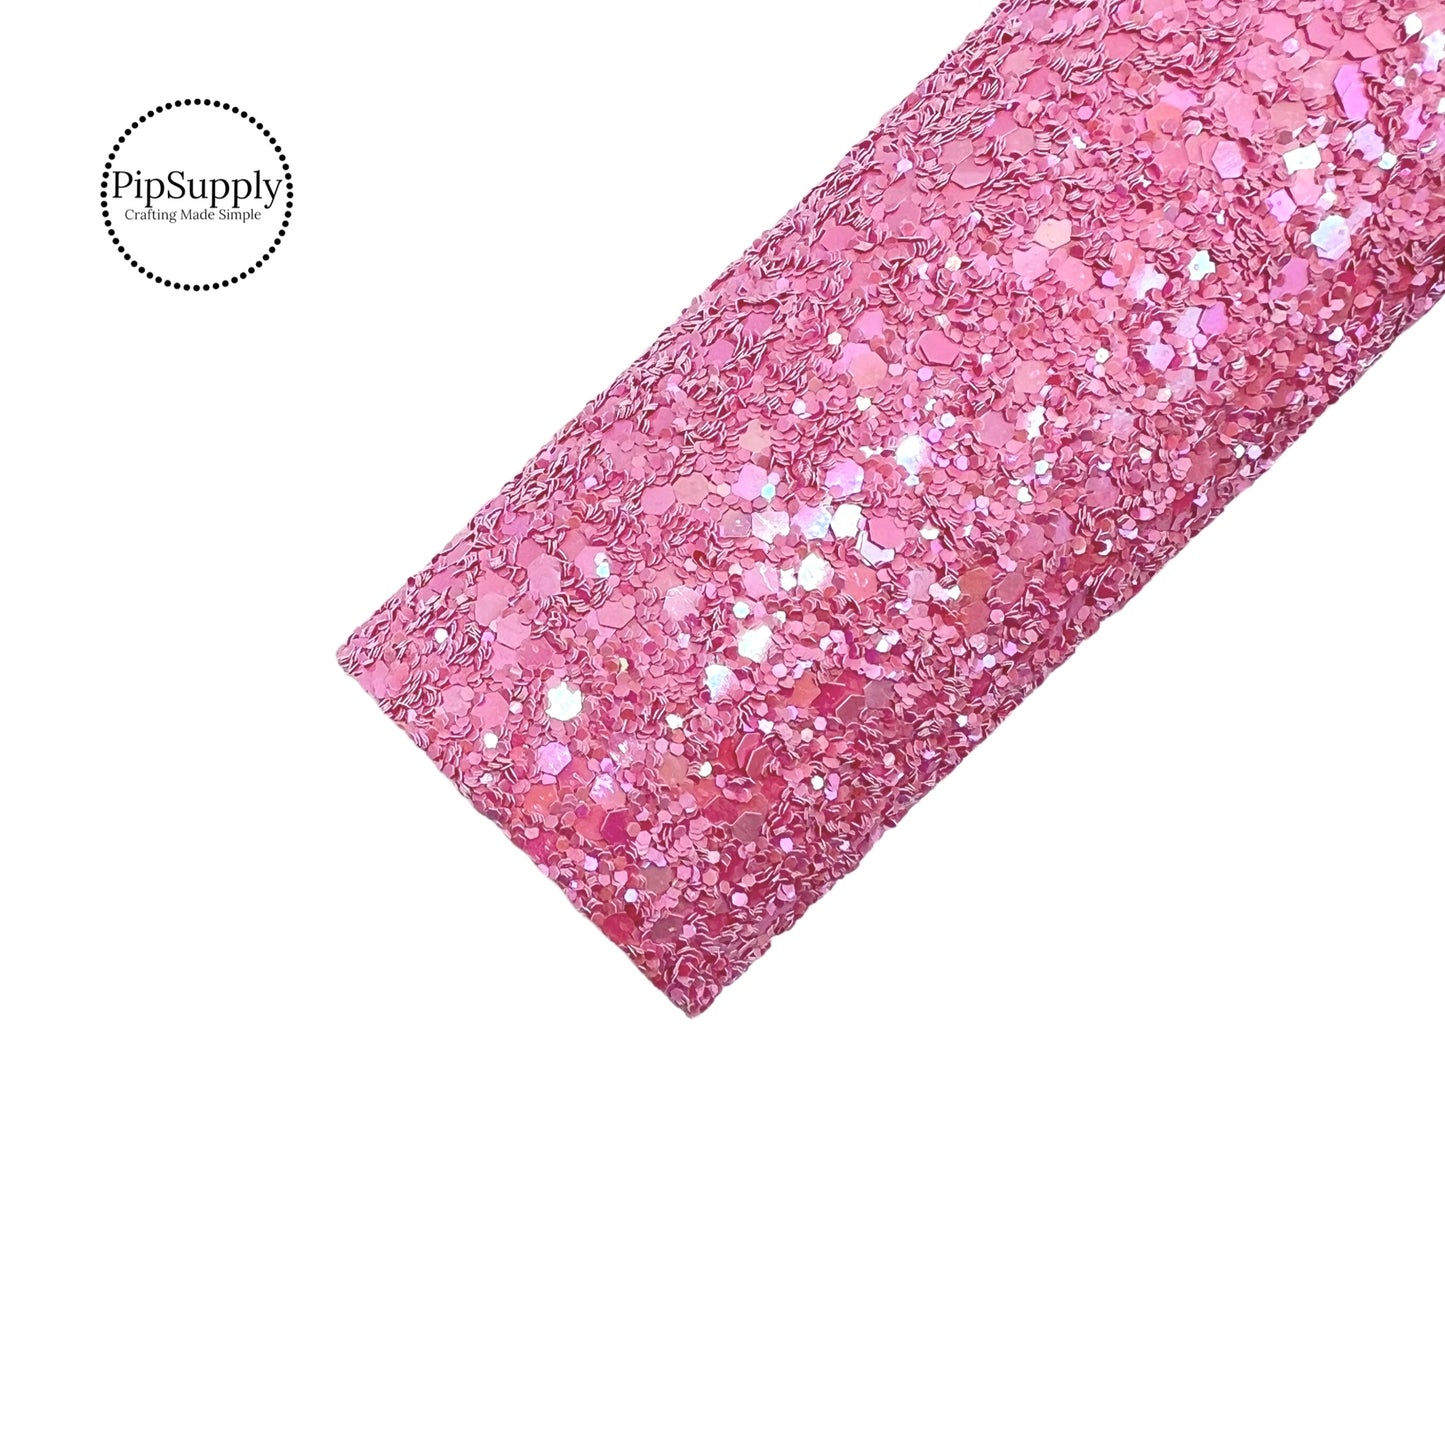 Solid carnation pink chunky glitter sheet